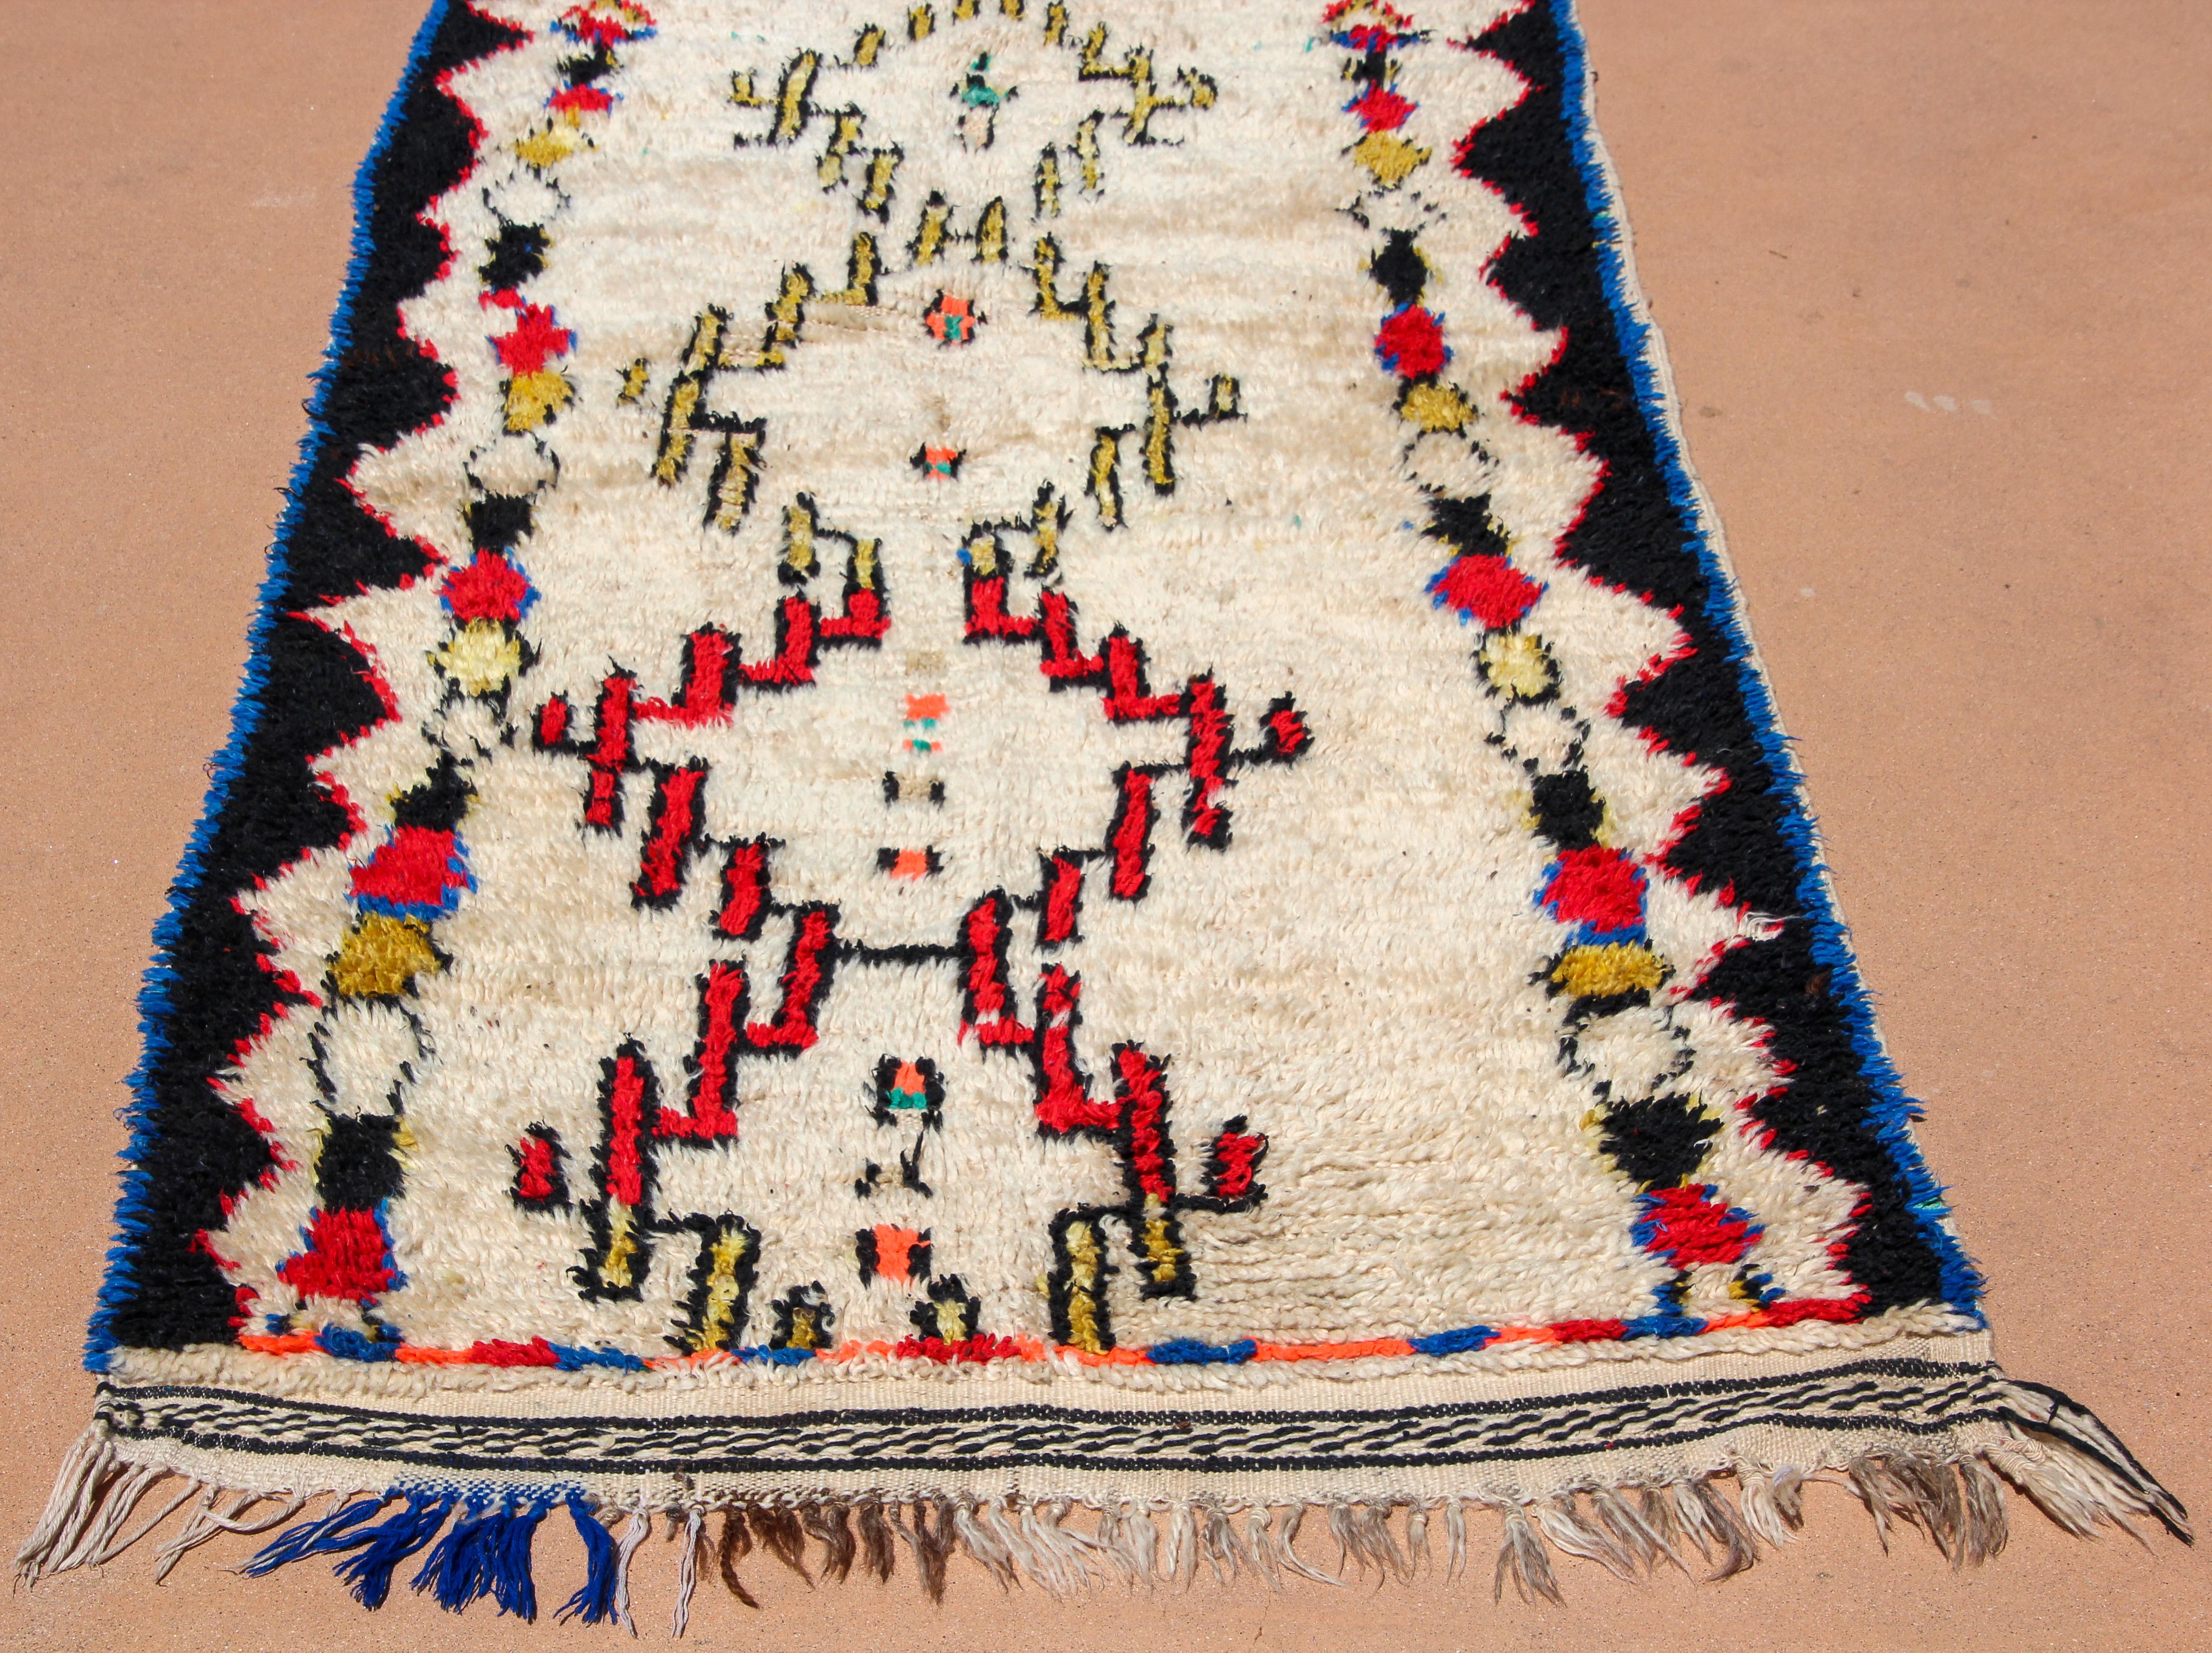 1960s authentic wonderf example of Moroccan Berber weaving from the high atlas region.Beautif Azilal tribal African rug from Morocco, handcrafted from wo and cotton.This Moroccan rug features contemporary abstract geometrical designs, vibrant and